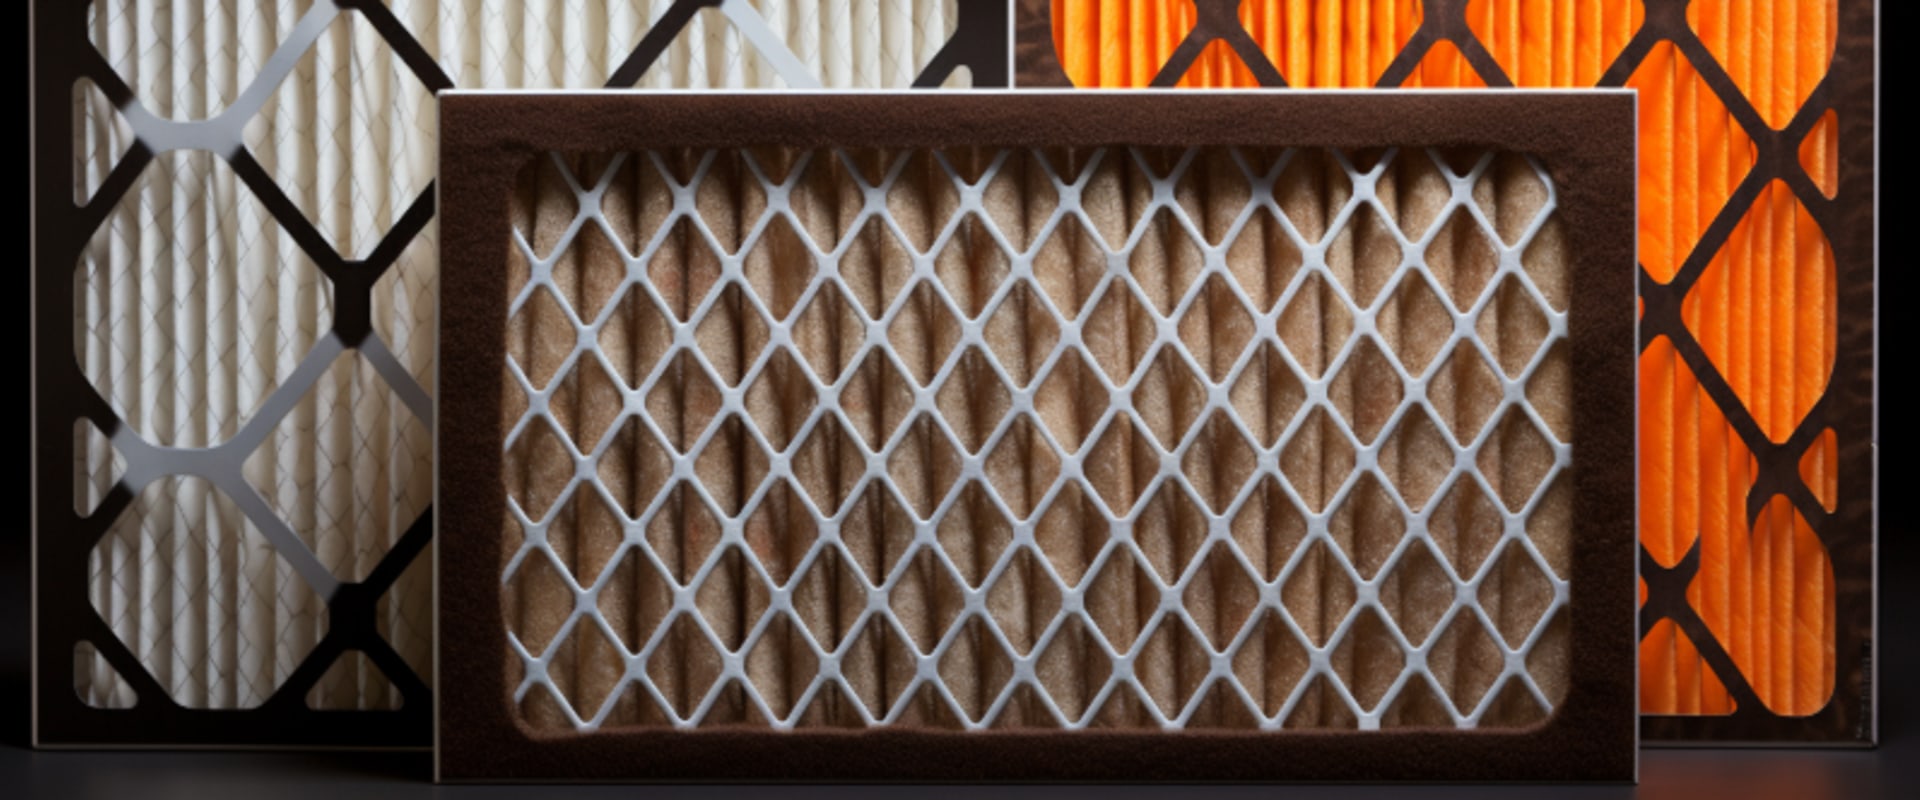 Efficiently Maintain Your Home Furnace And AC With 16x24x1 Air Filters